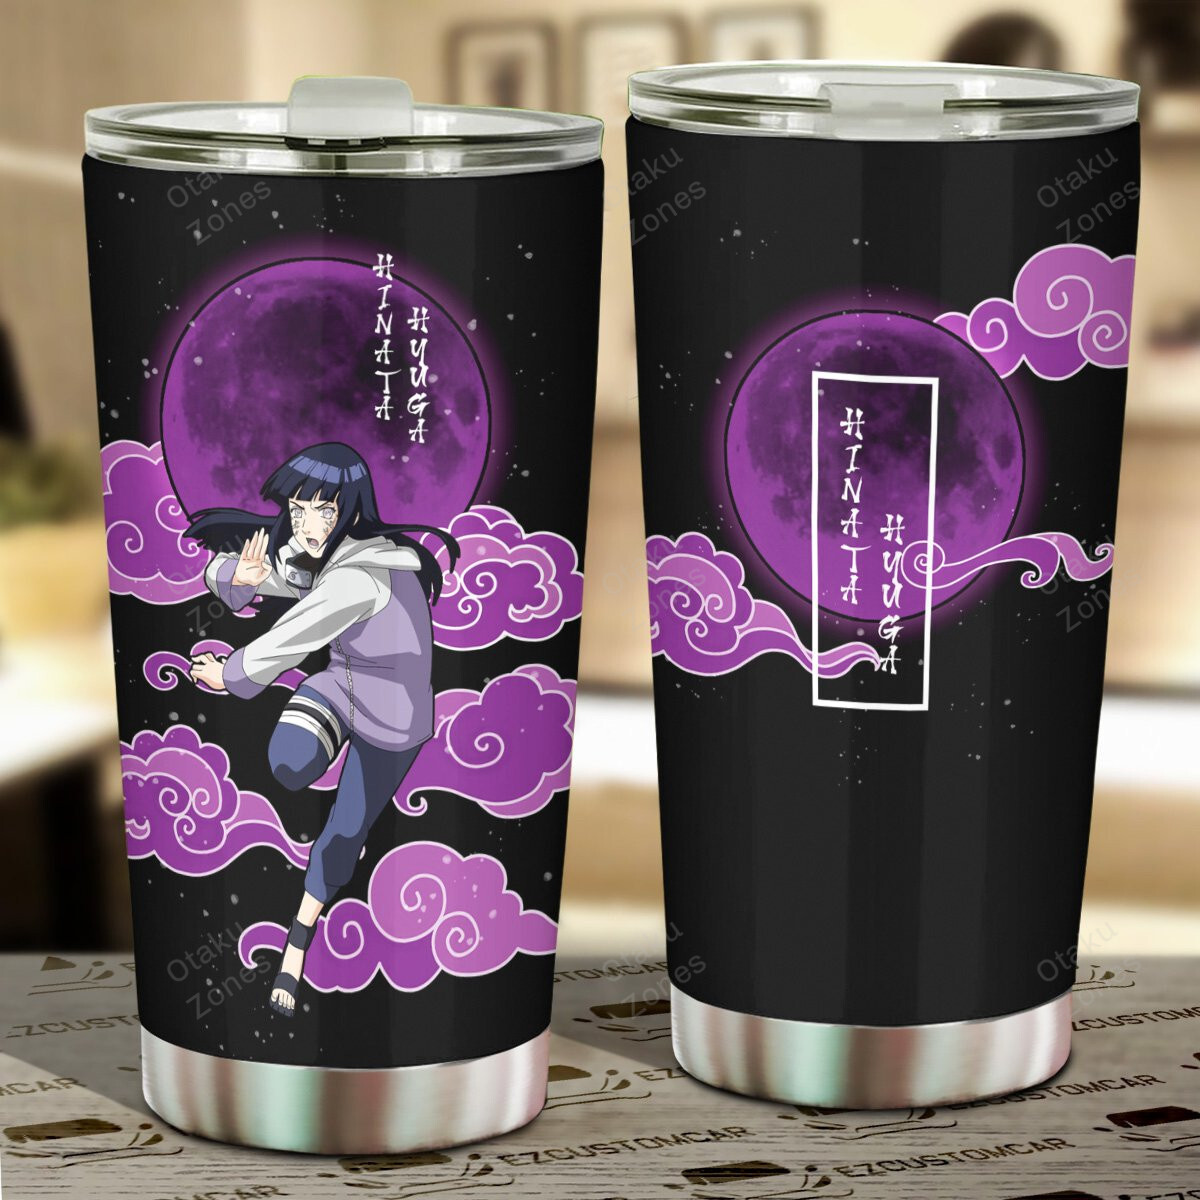 Go ahead and order your new tumbler now! 23